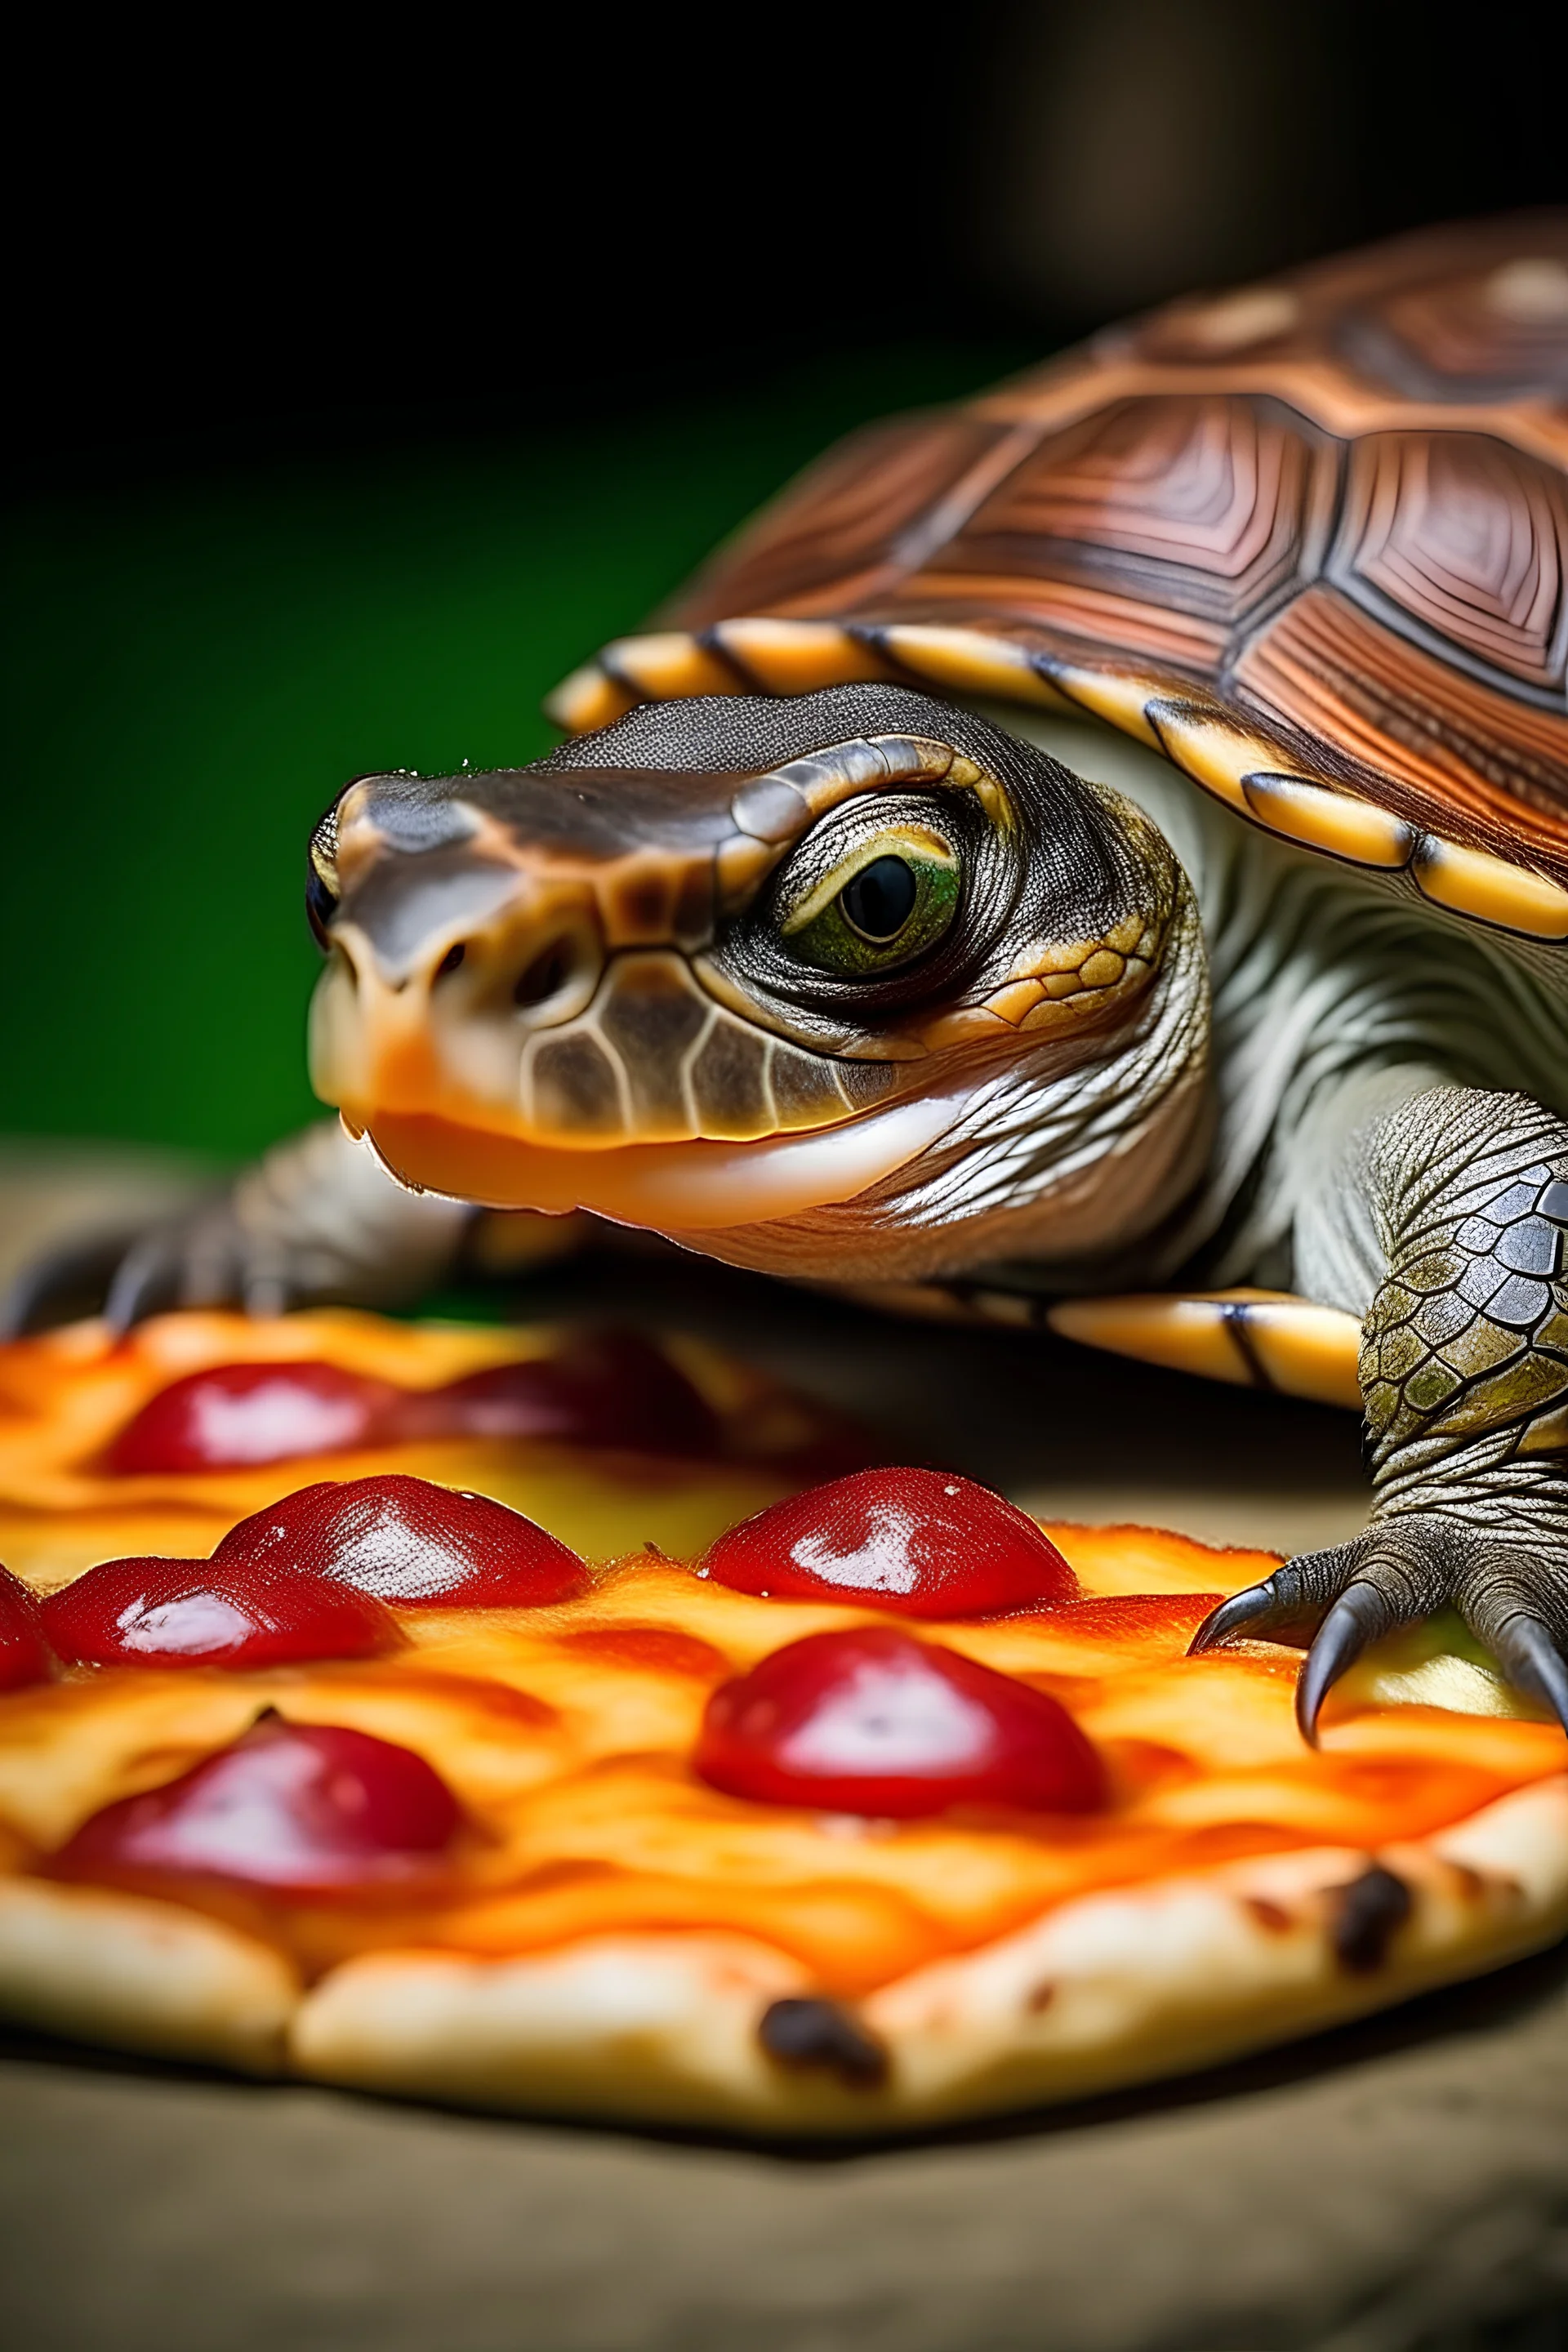 turtle eating a pizza, she is angry, she is from iceland